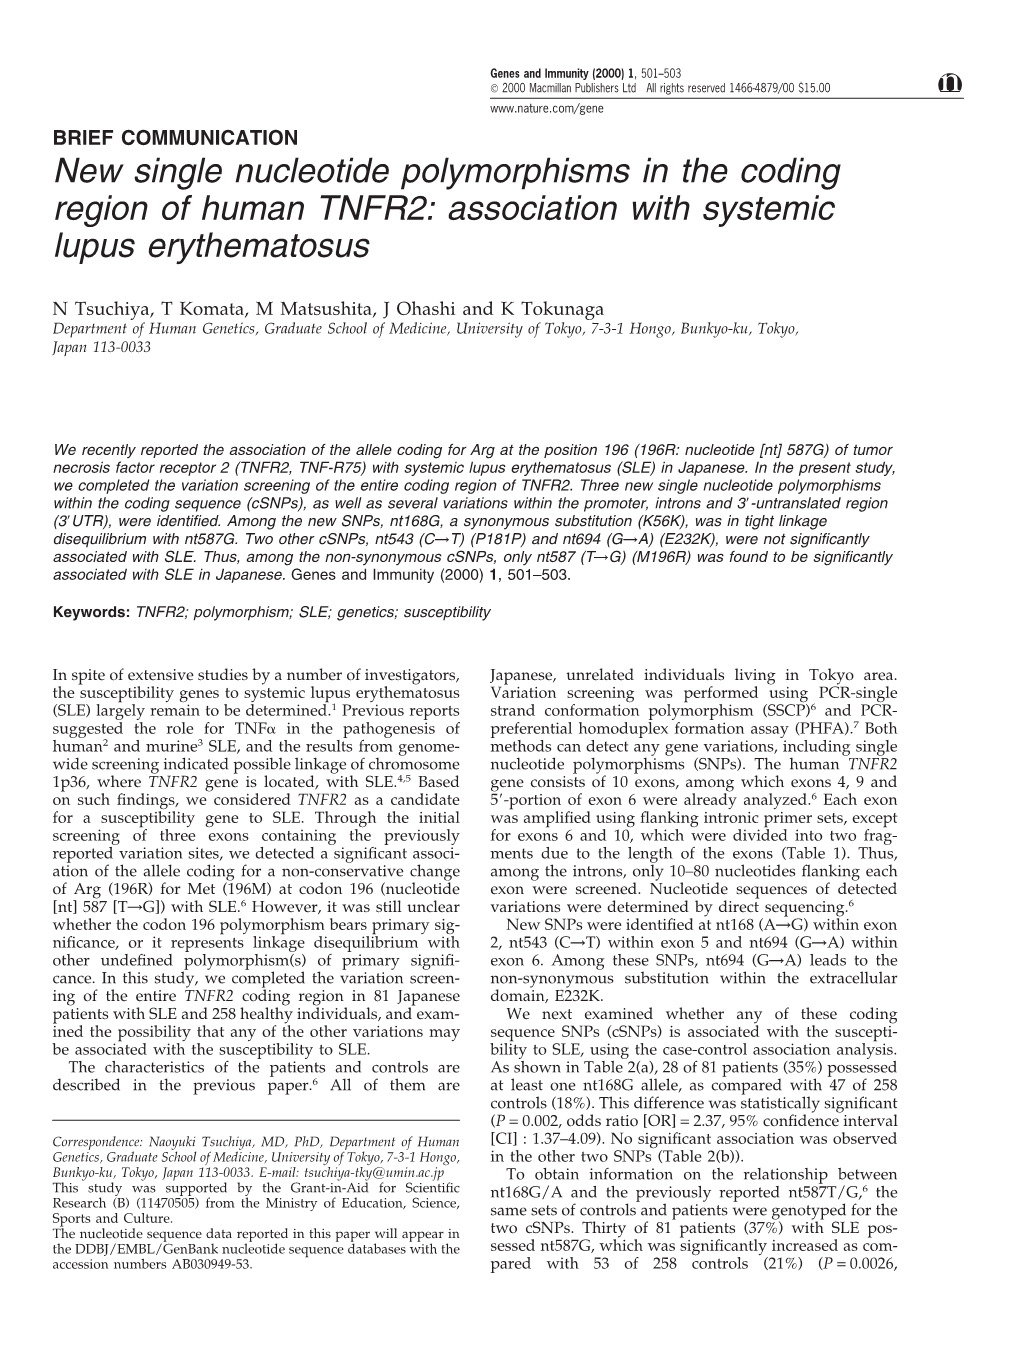 New Single Nucleotide Polymorphisms in the Coding Region of Human TNFR2: Association with Systemic Lupus Erythematosus